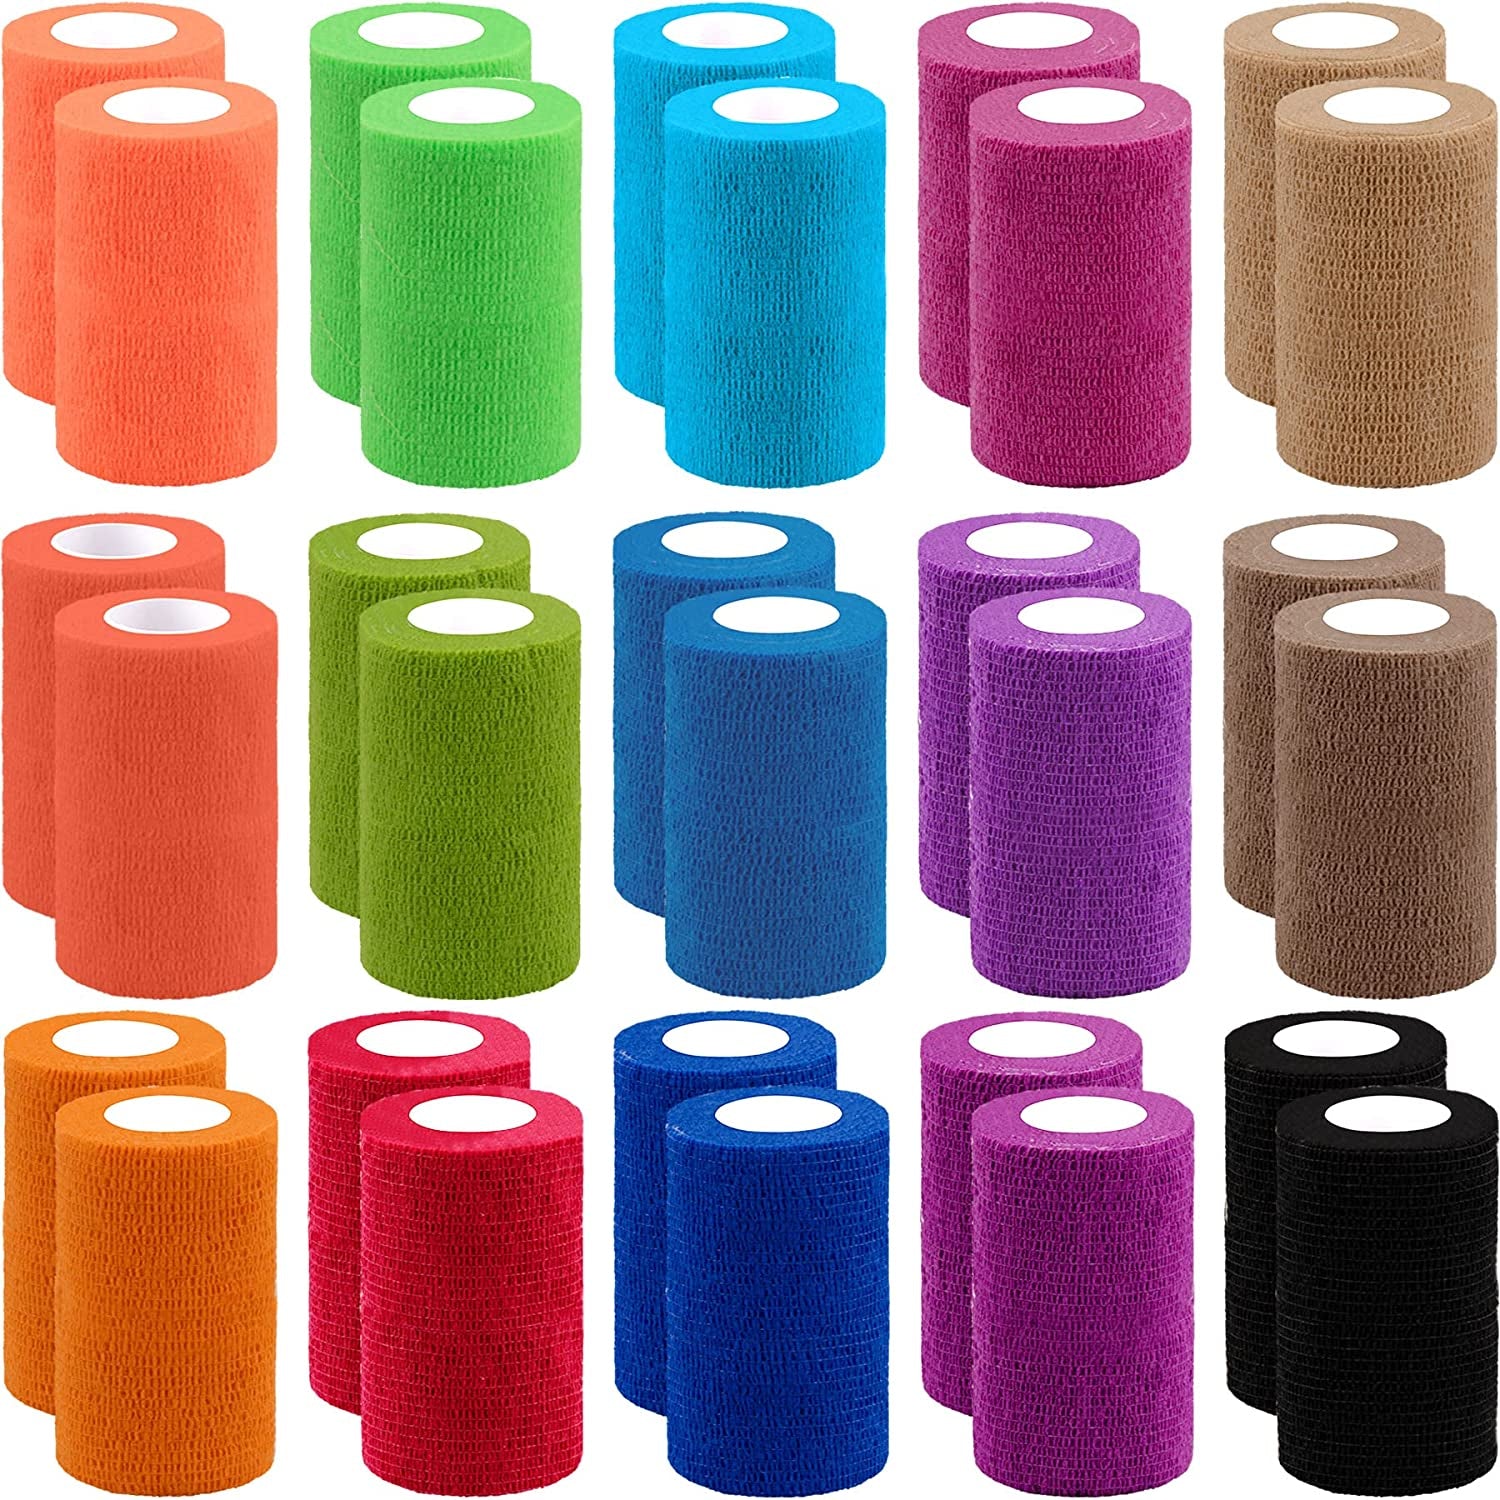 30 Rolls Self Adherent Wrap 1 Inch Bandage Adhesive Wrap Breathable Athletic Tape Stretch Wrap Roll Sports Wrap Tape Self Adhesive Bandage Wrap for Wrist Ankle Swelling Sprains(30 Colors)